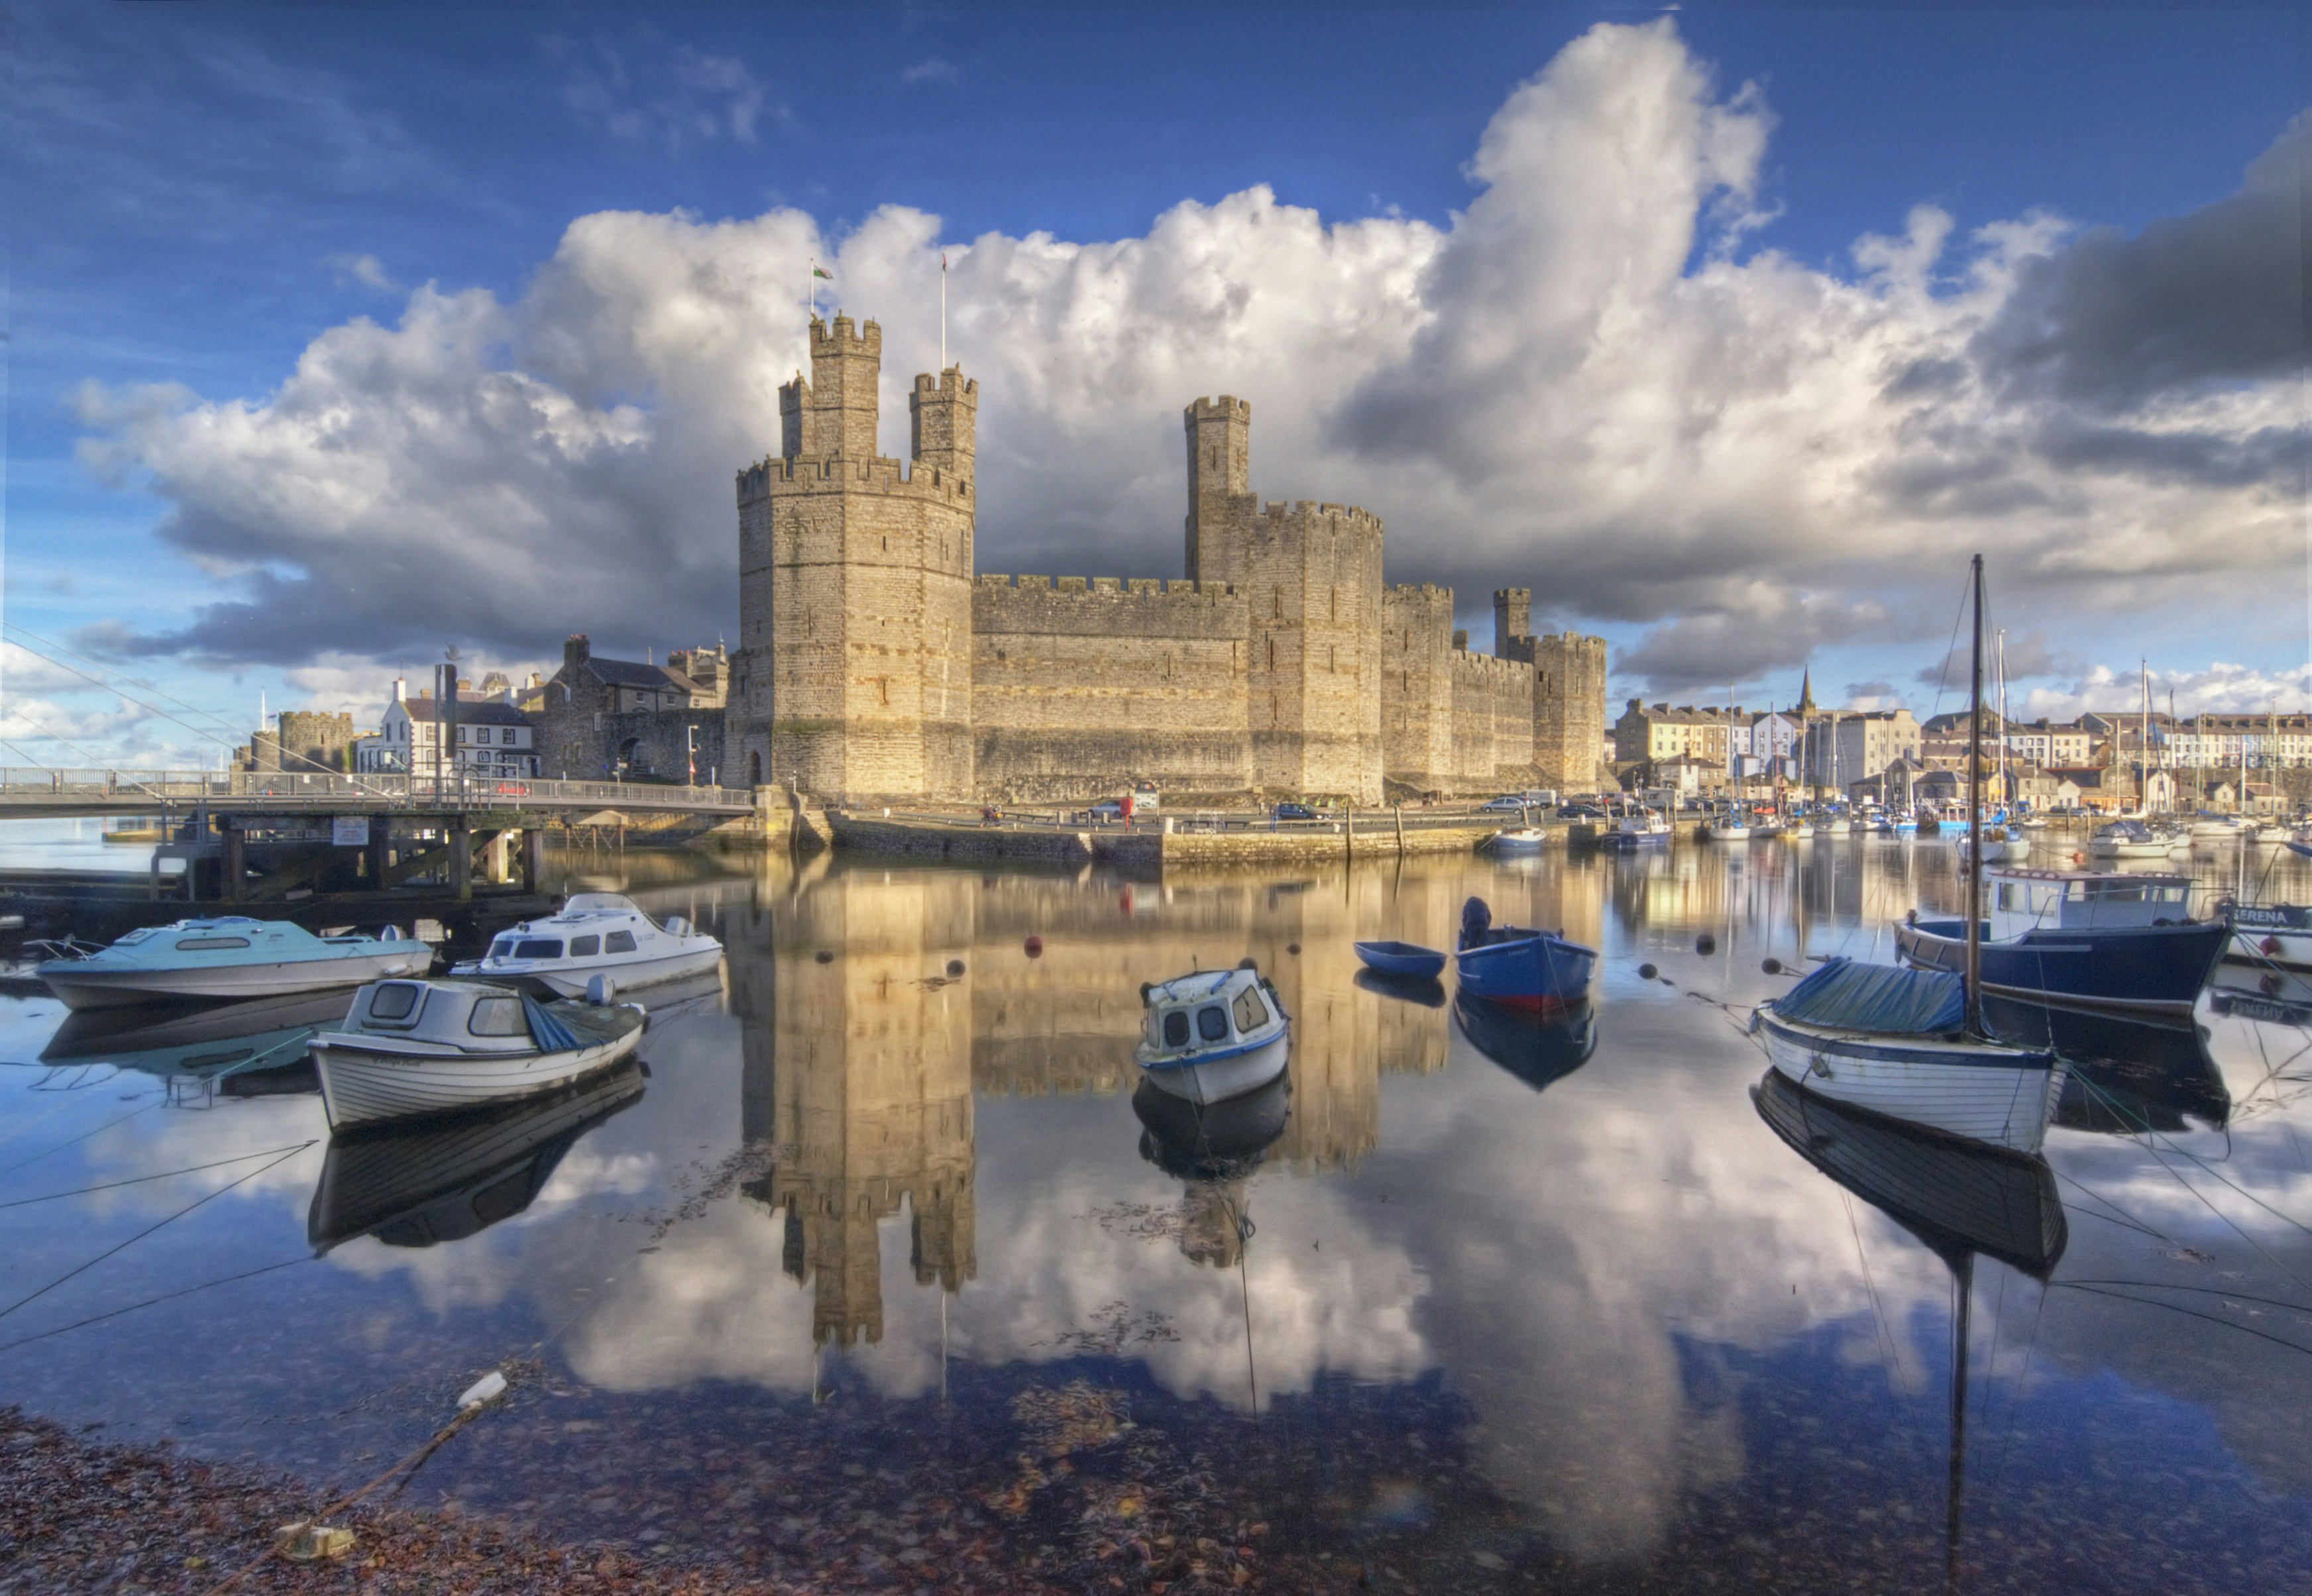 Several small boats sit on the glassy water surrounding Caernarfon Castle in Wales; picturesque waterfront buildings can be seen in the background.